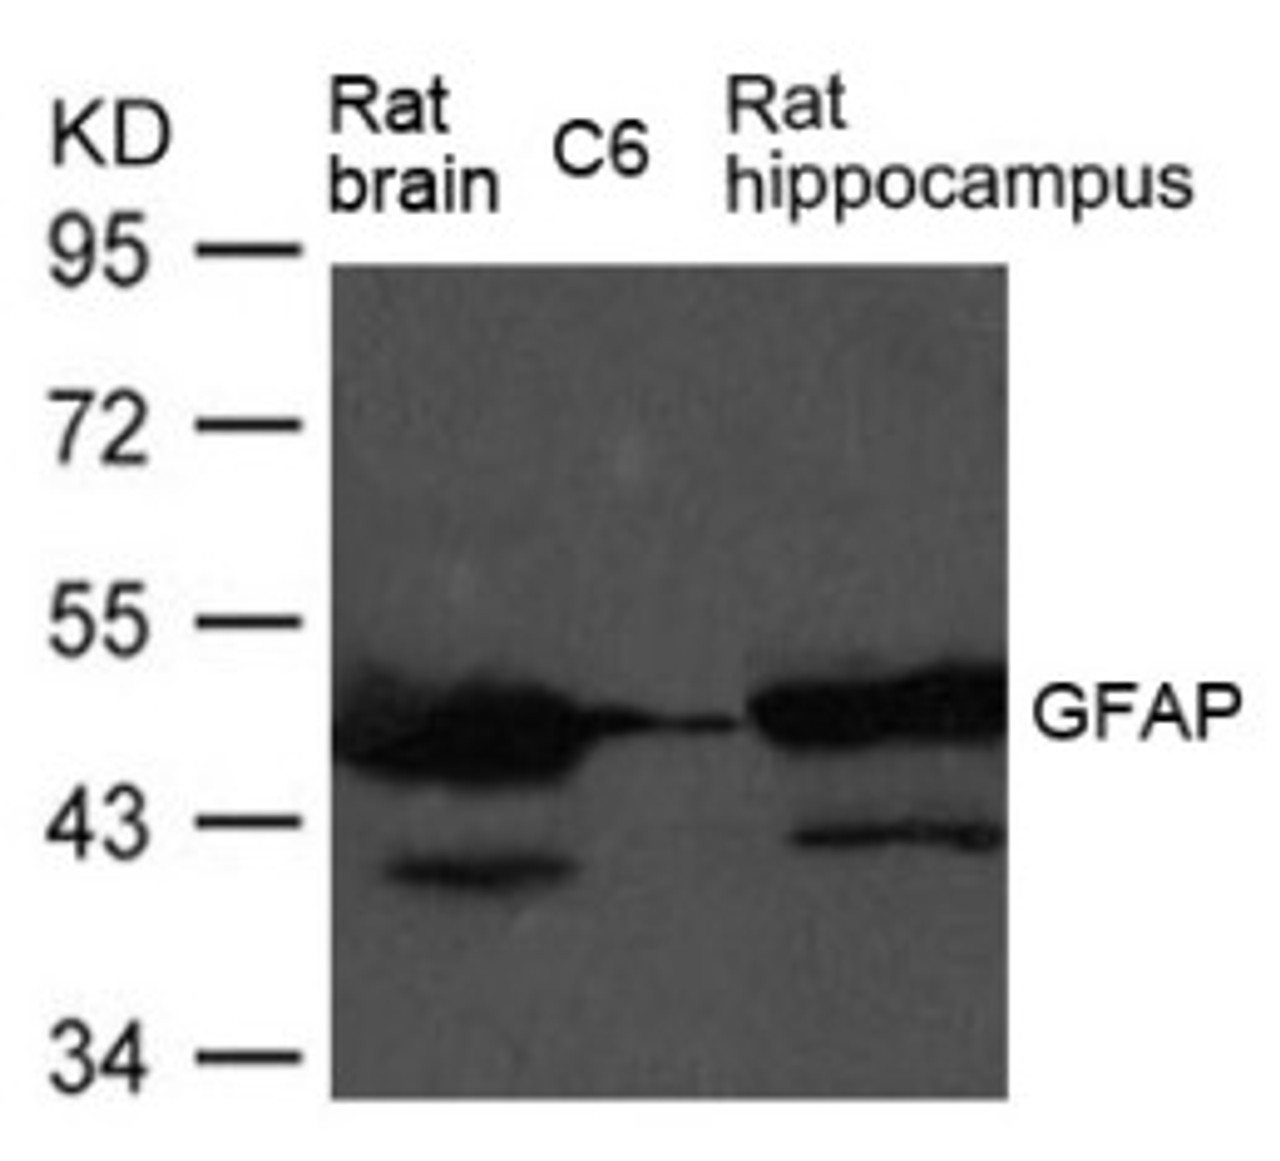 Western blot analysis of extract from Rat brain, Rat hippocampus tissue and C6 cells using GFAP Antibody.